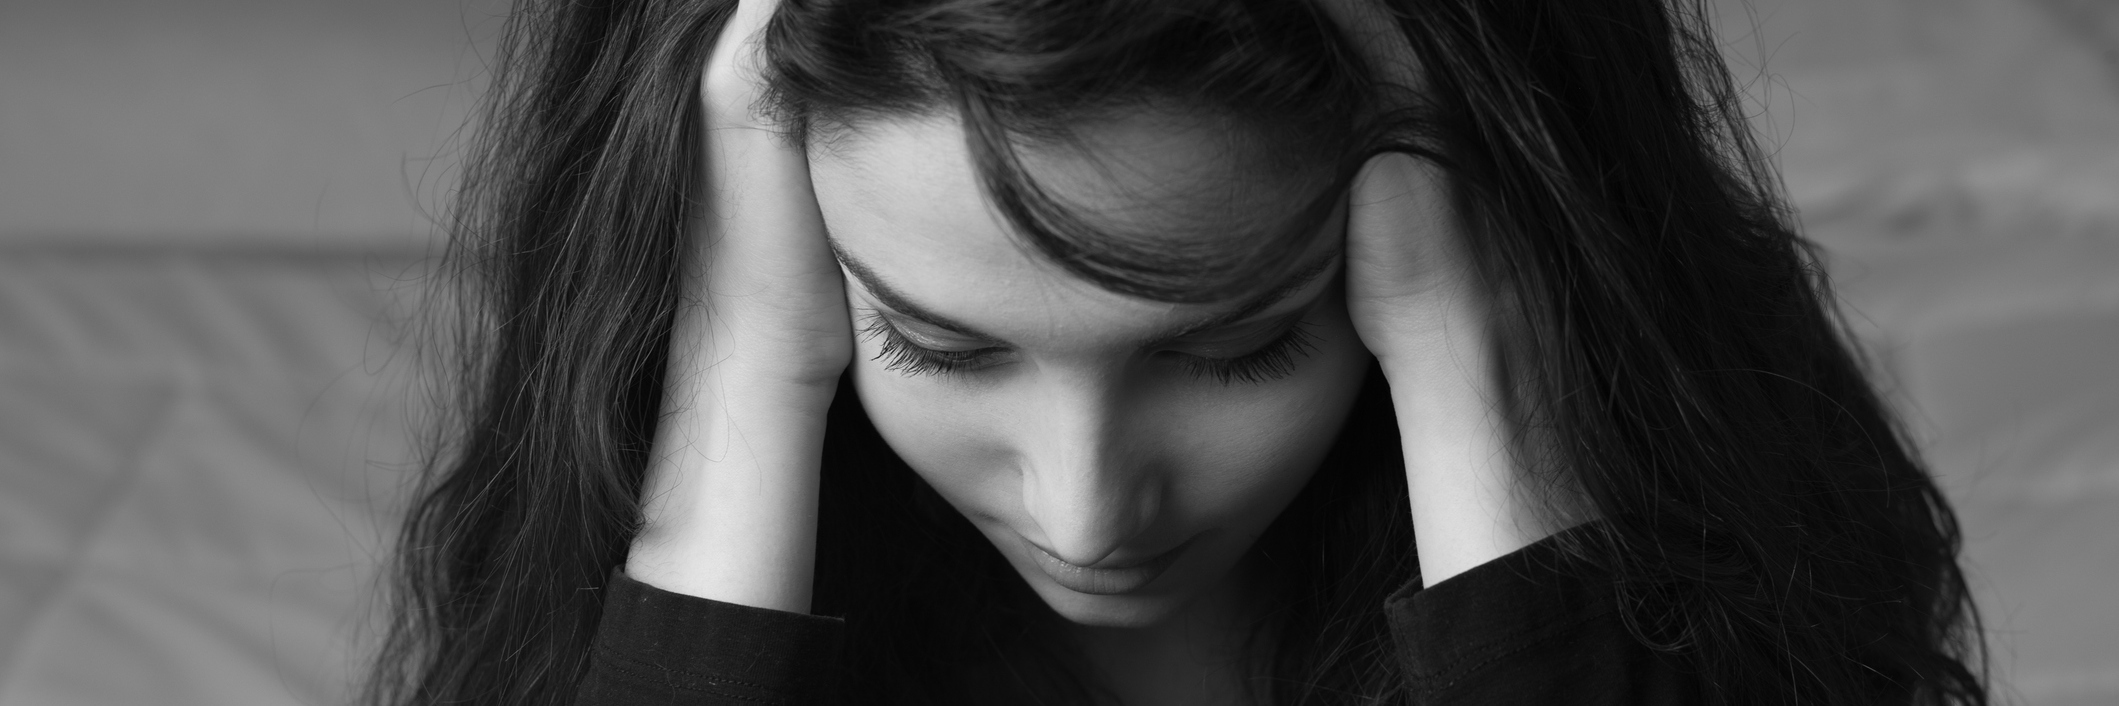 black and white photo of woman holding her head in pain